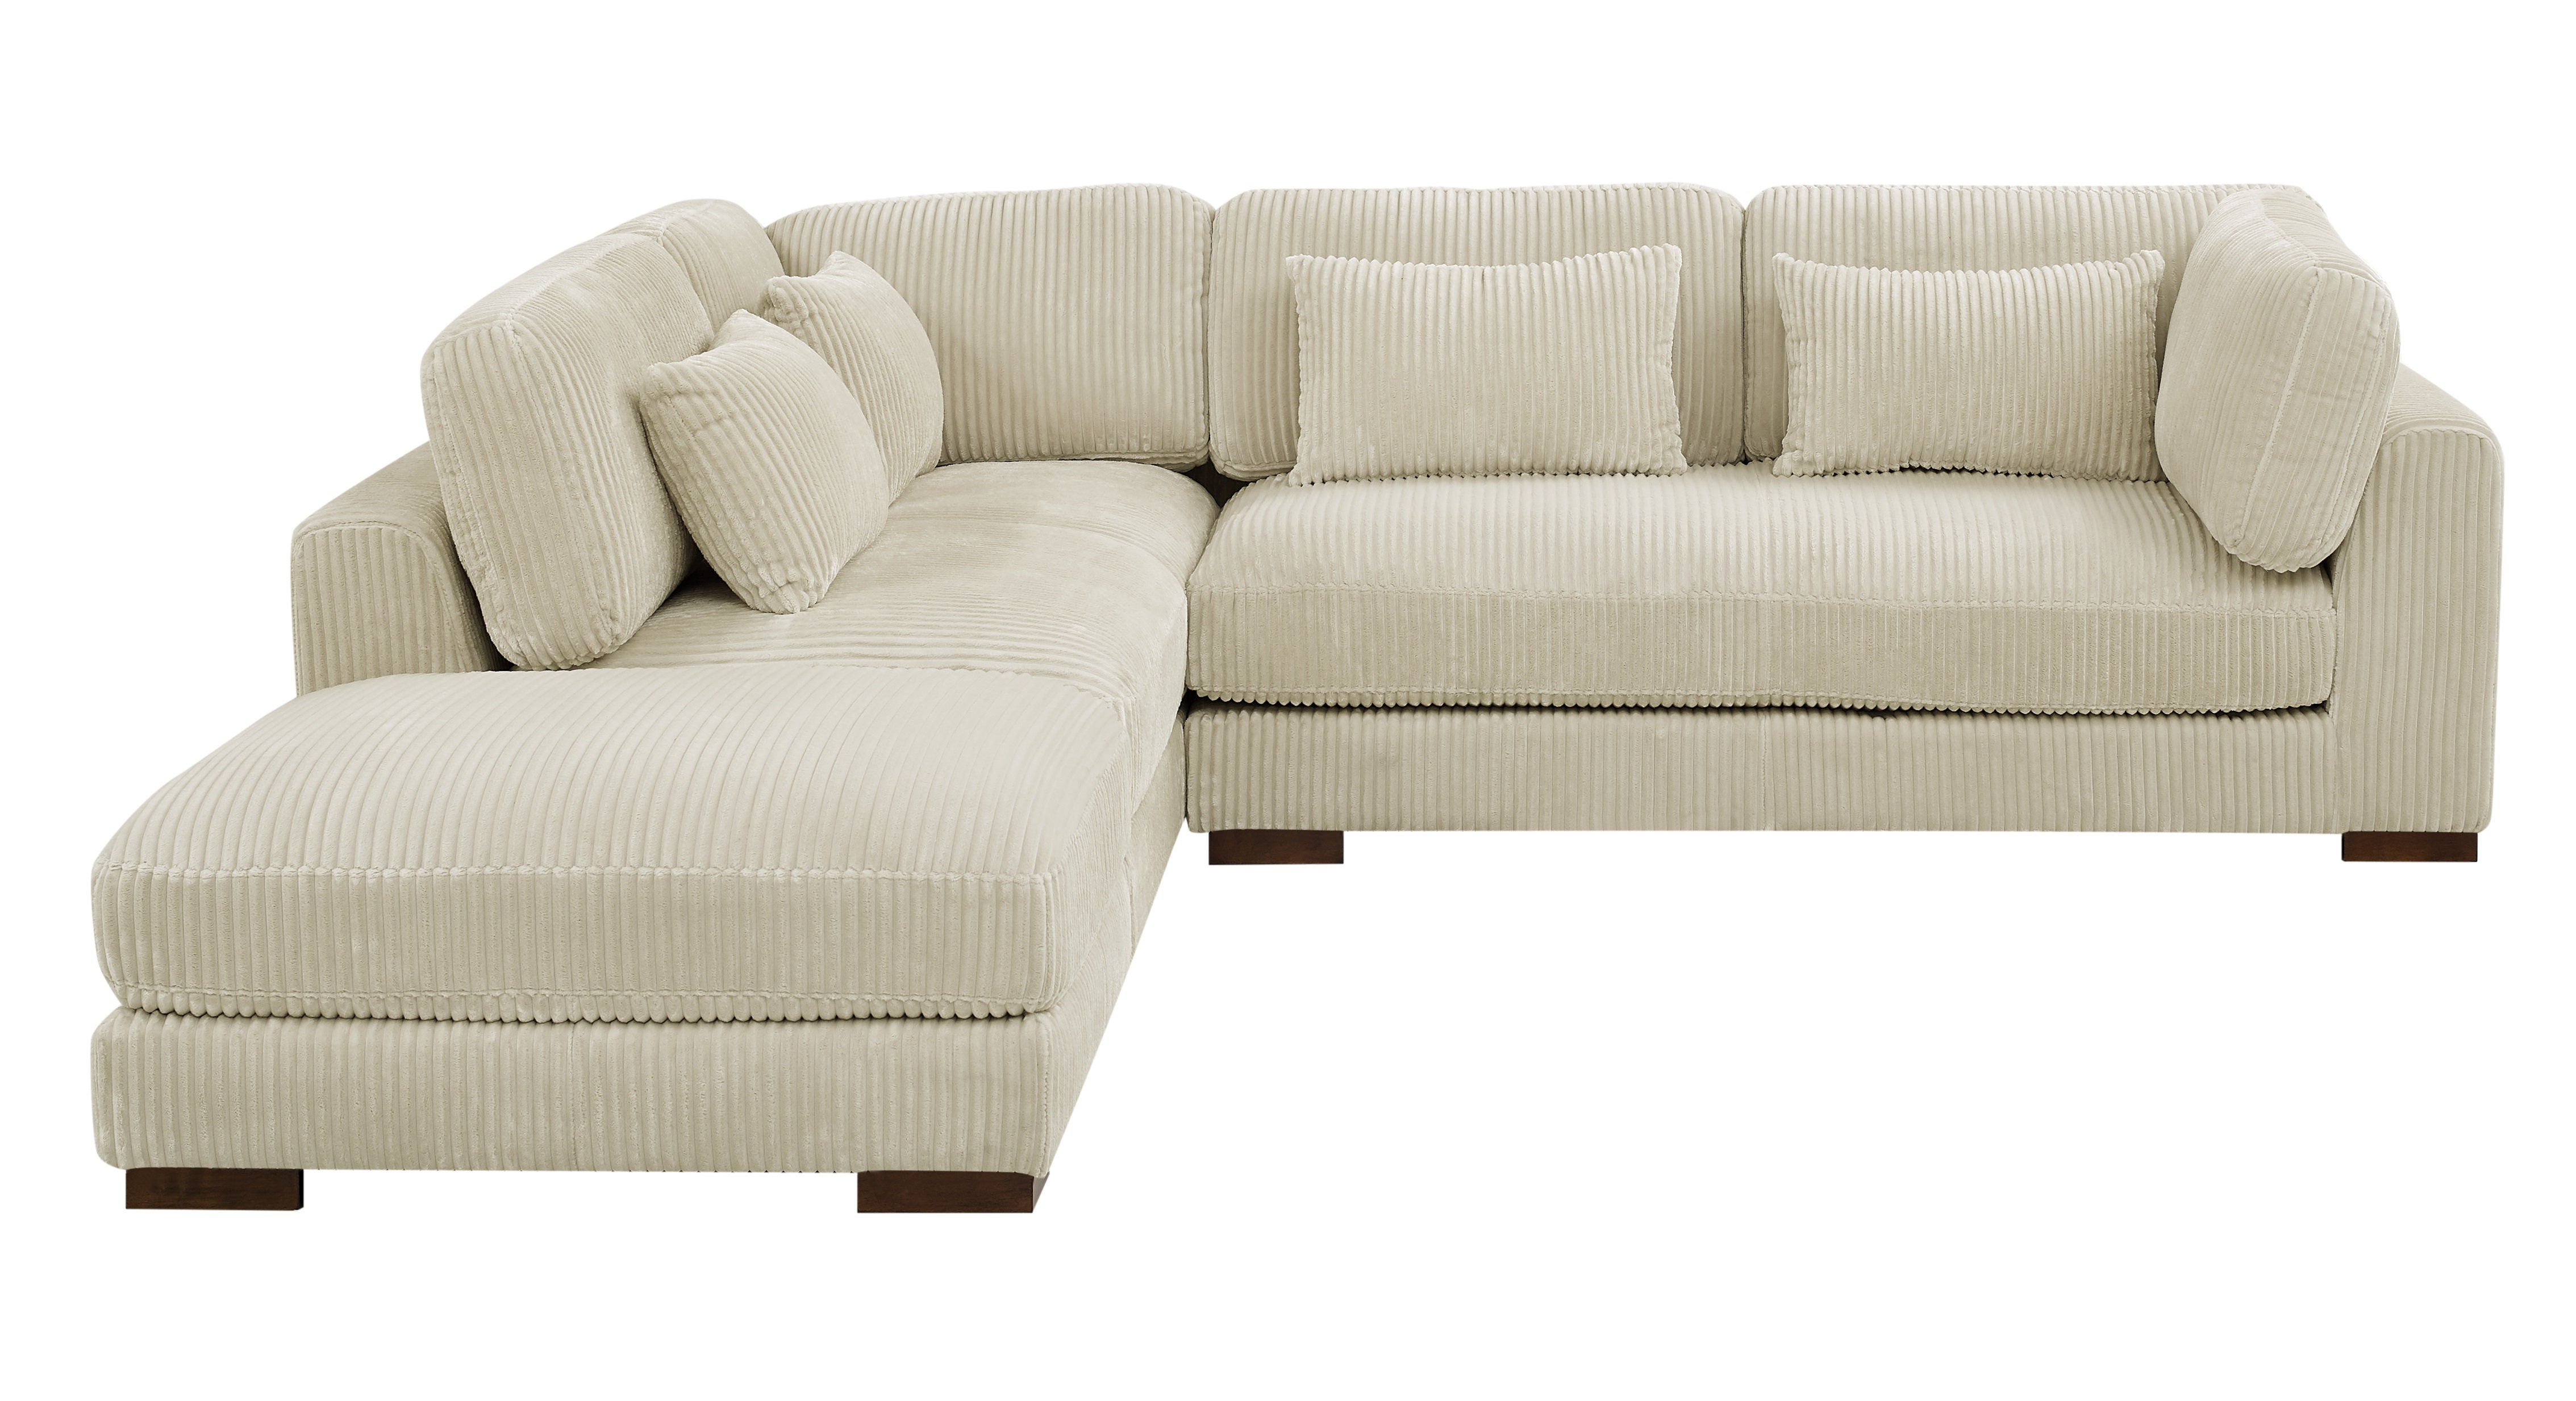 Interface Bebé sofa with chaise longue, right, beige Jagger 3 - oak